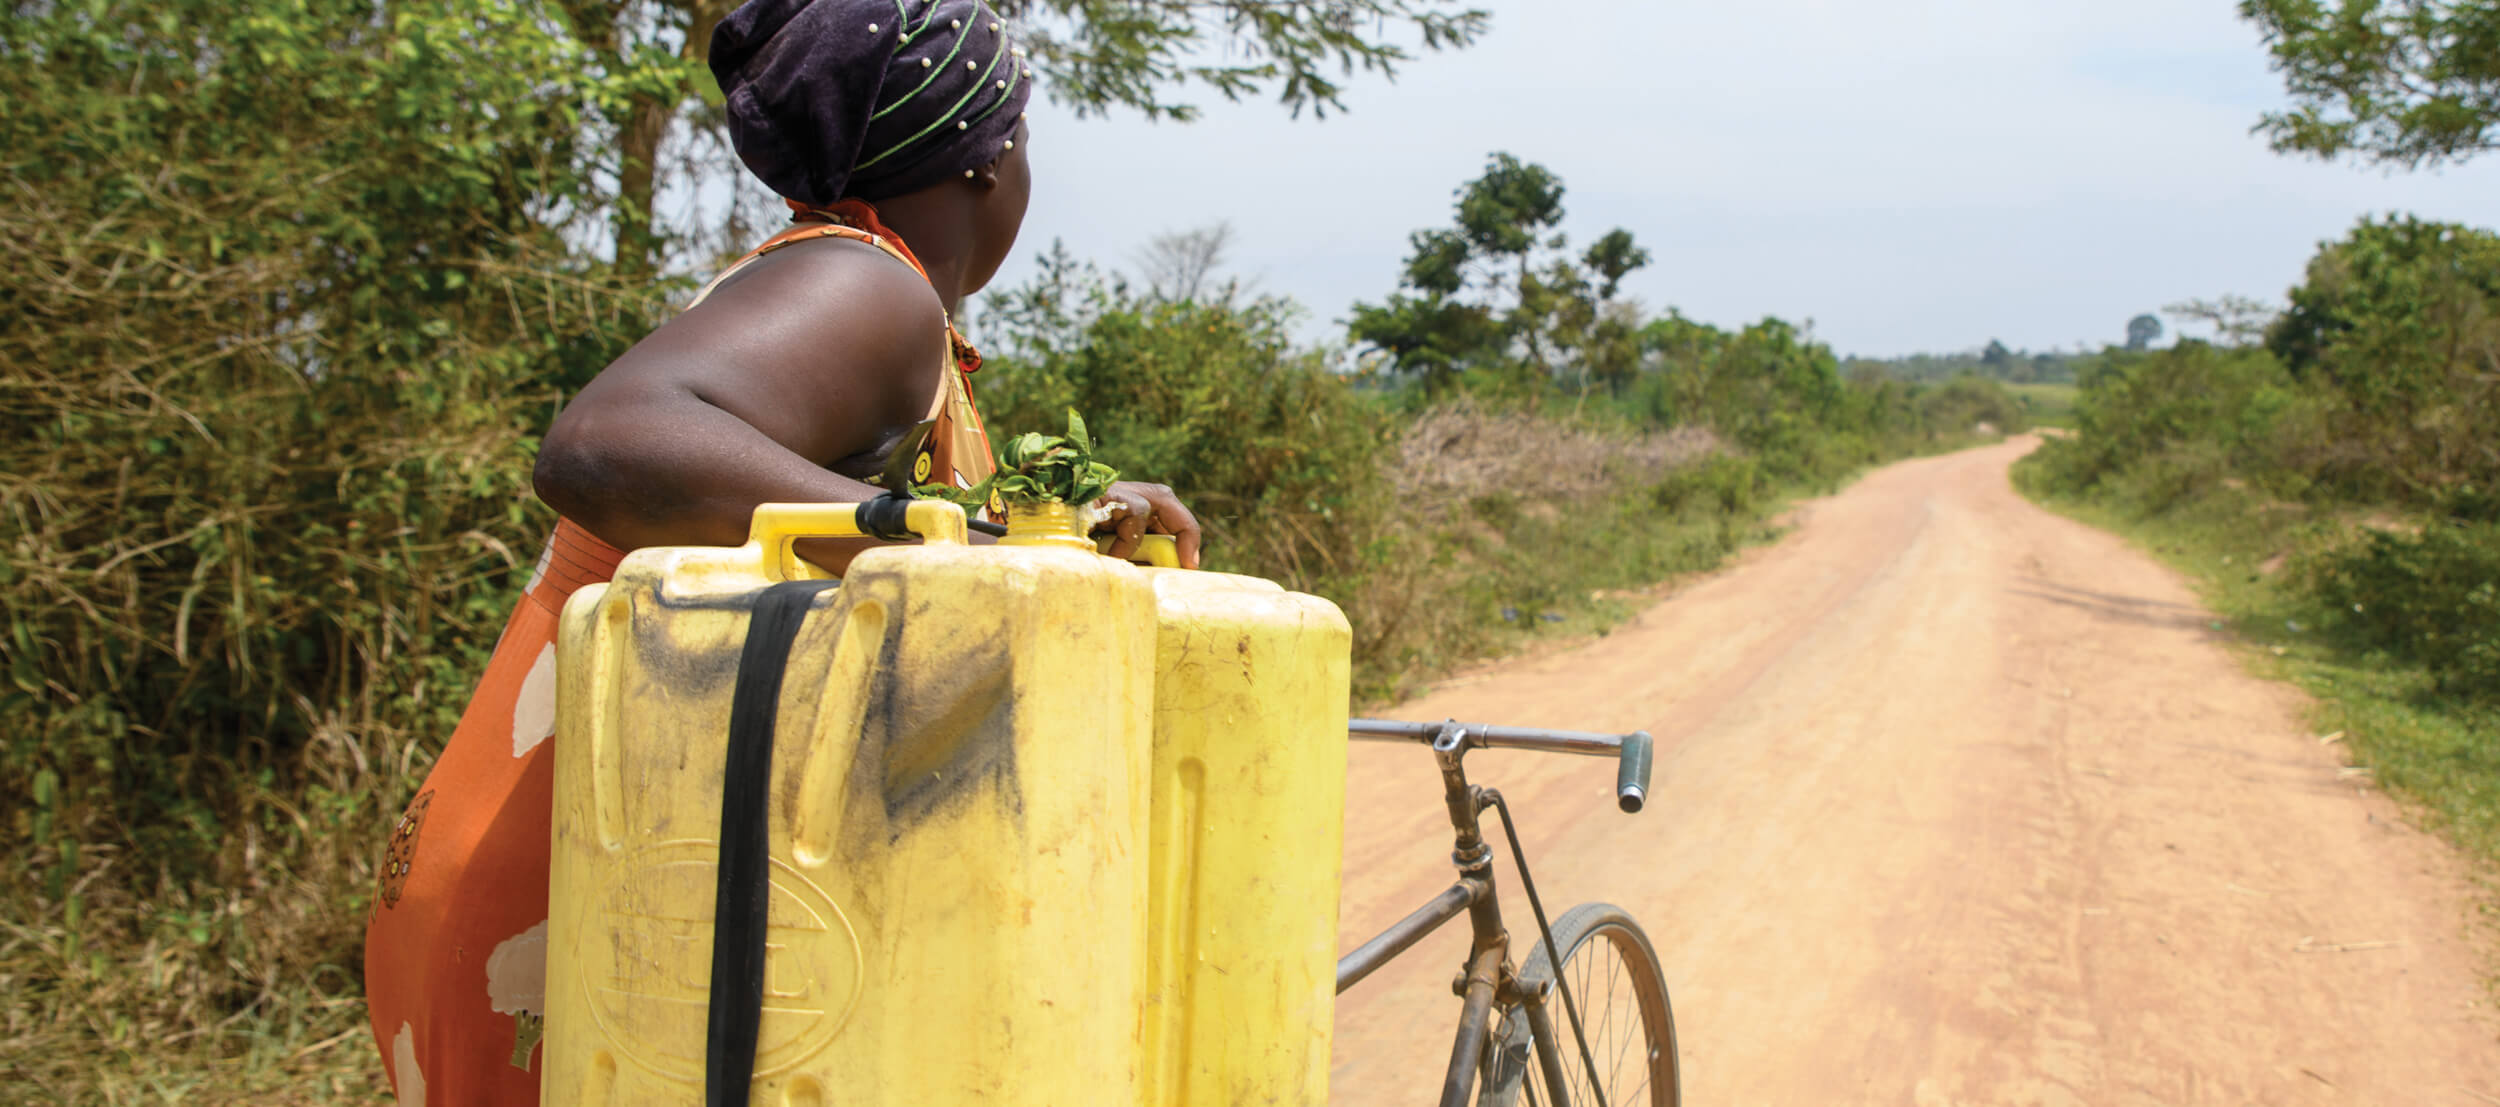 Image of a woman carrying water on a bicycle